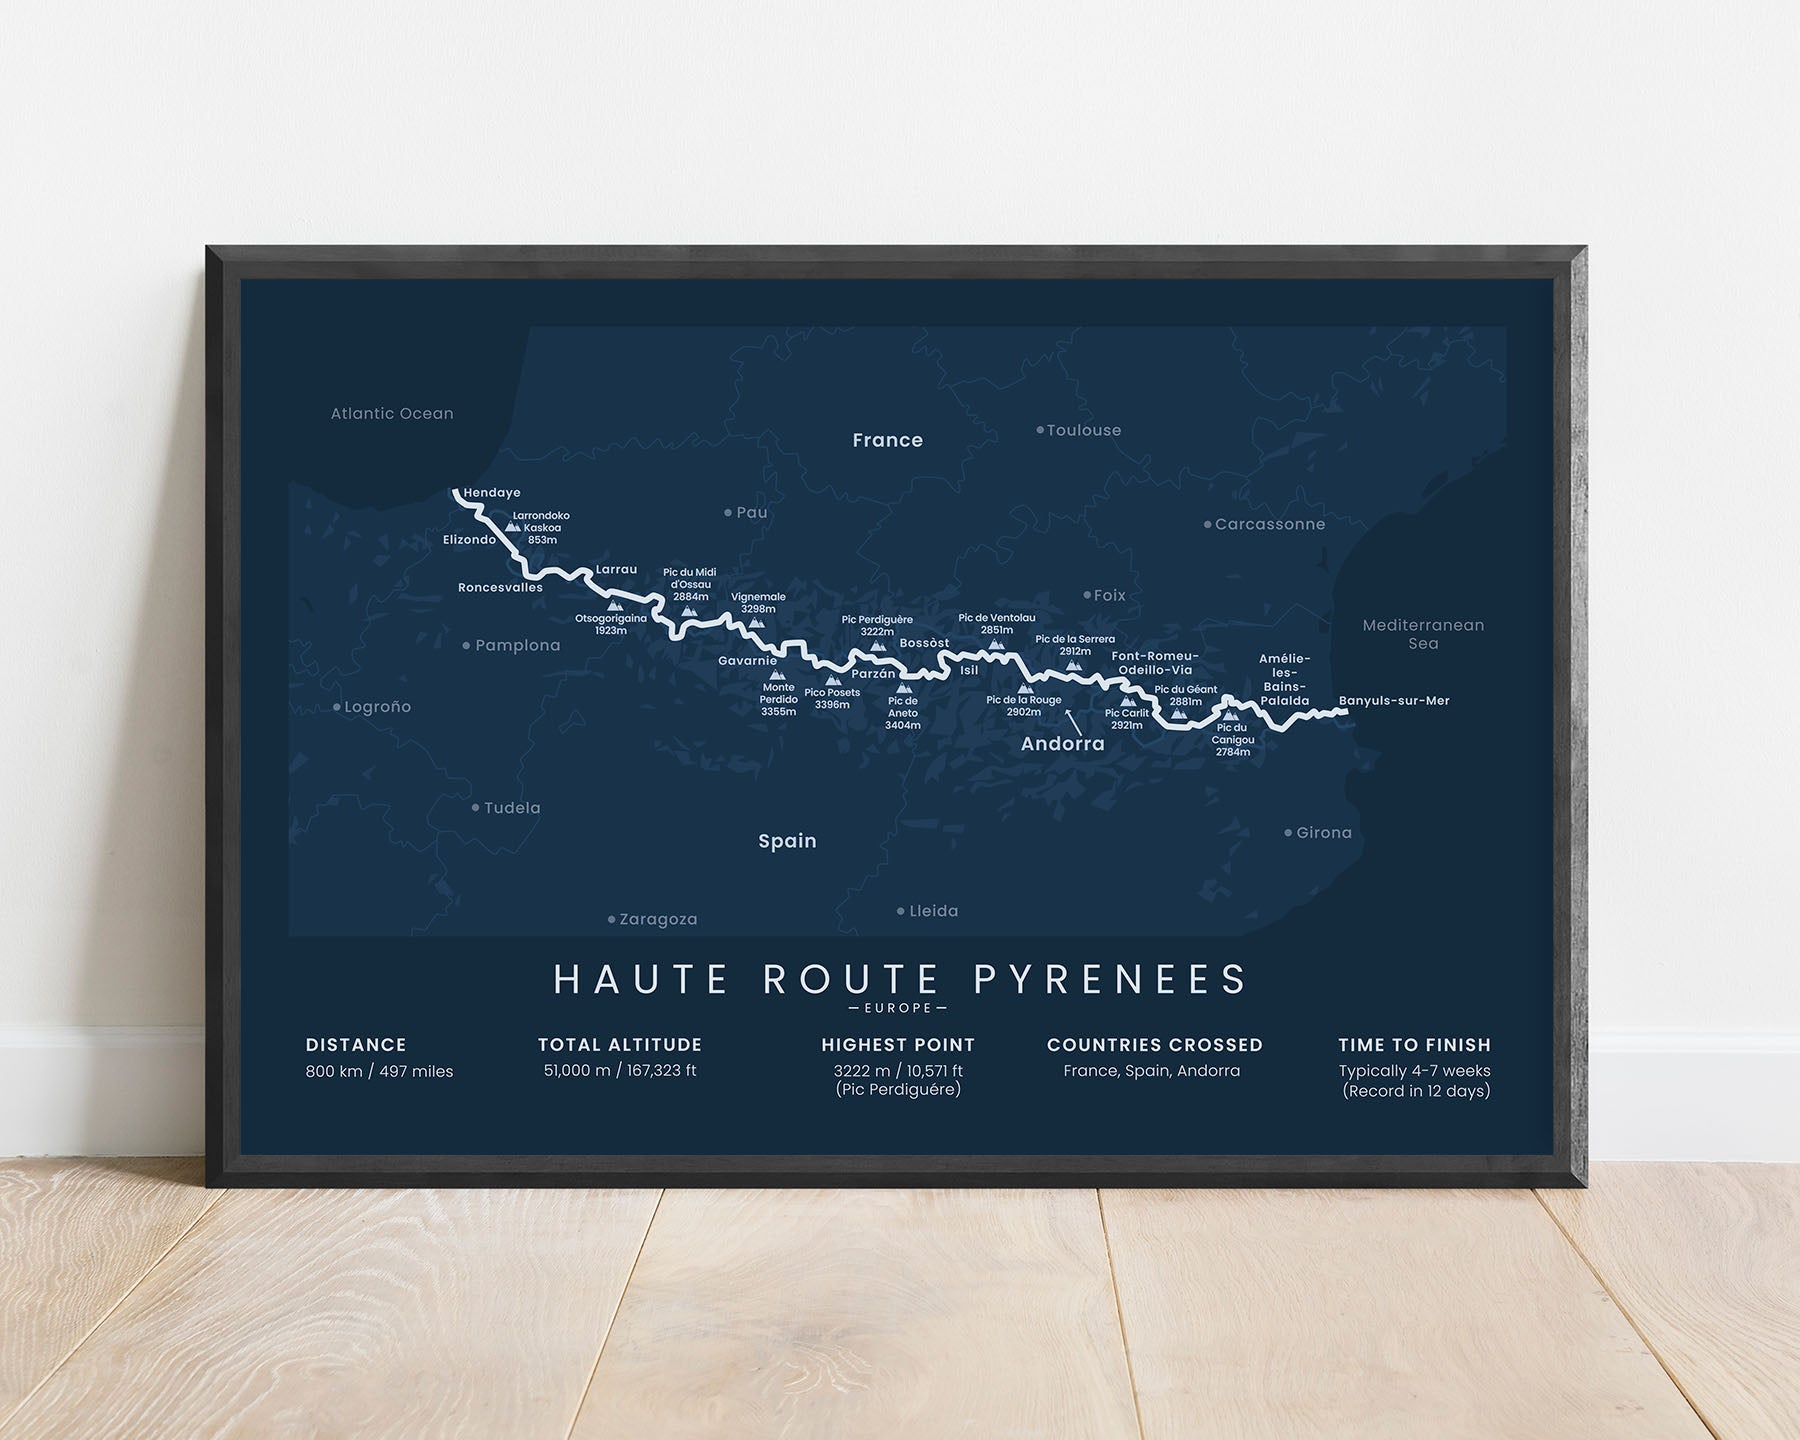 Pyrenean Haute Route thru hike print with blue background (Europe)